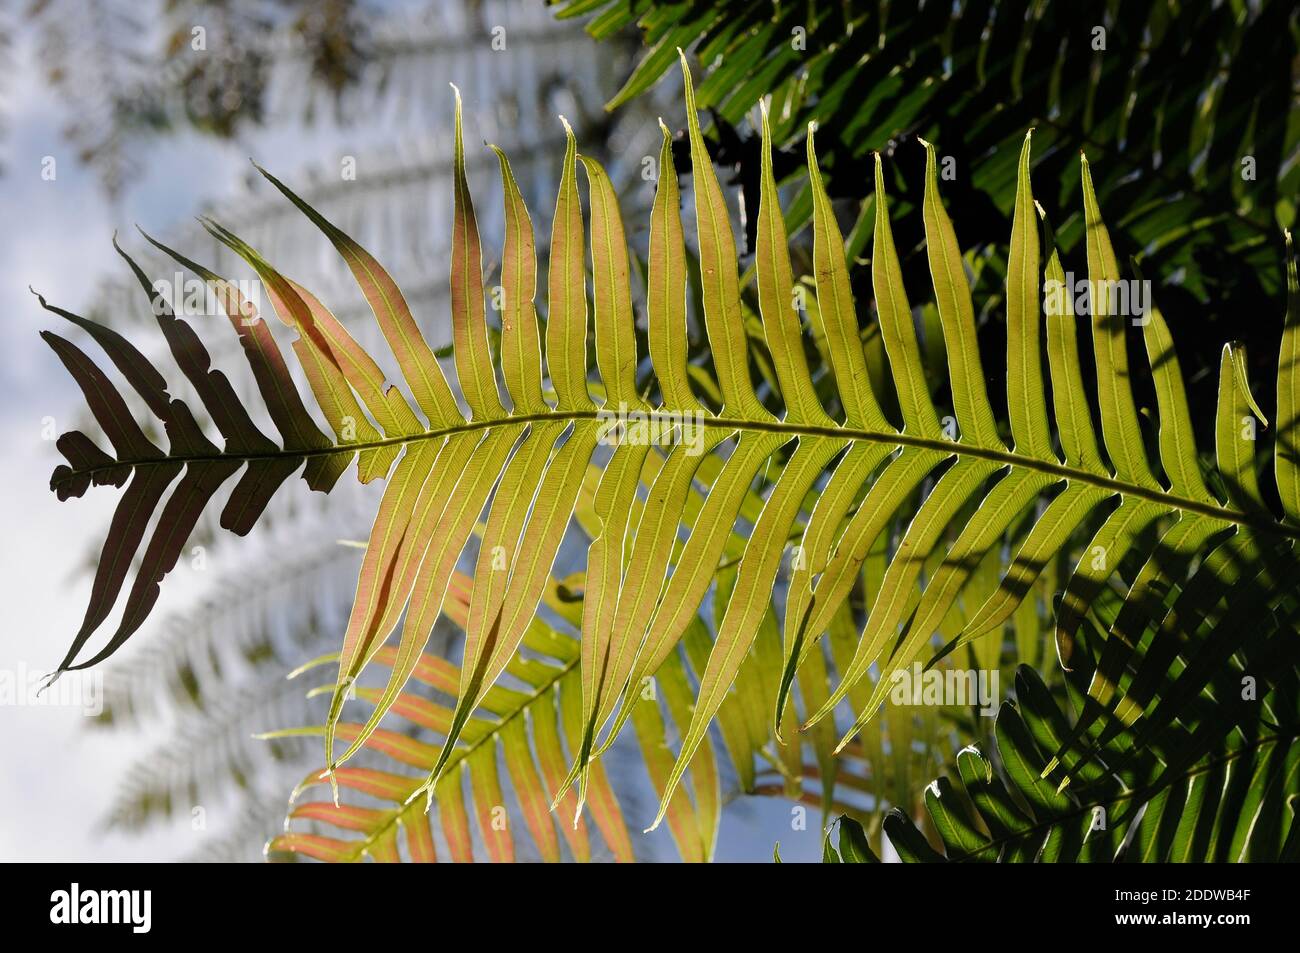 A frond of pointed hard fern catching sunlight in a rainforest Stock Photo